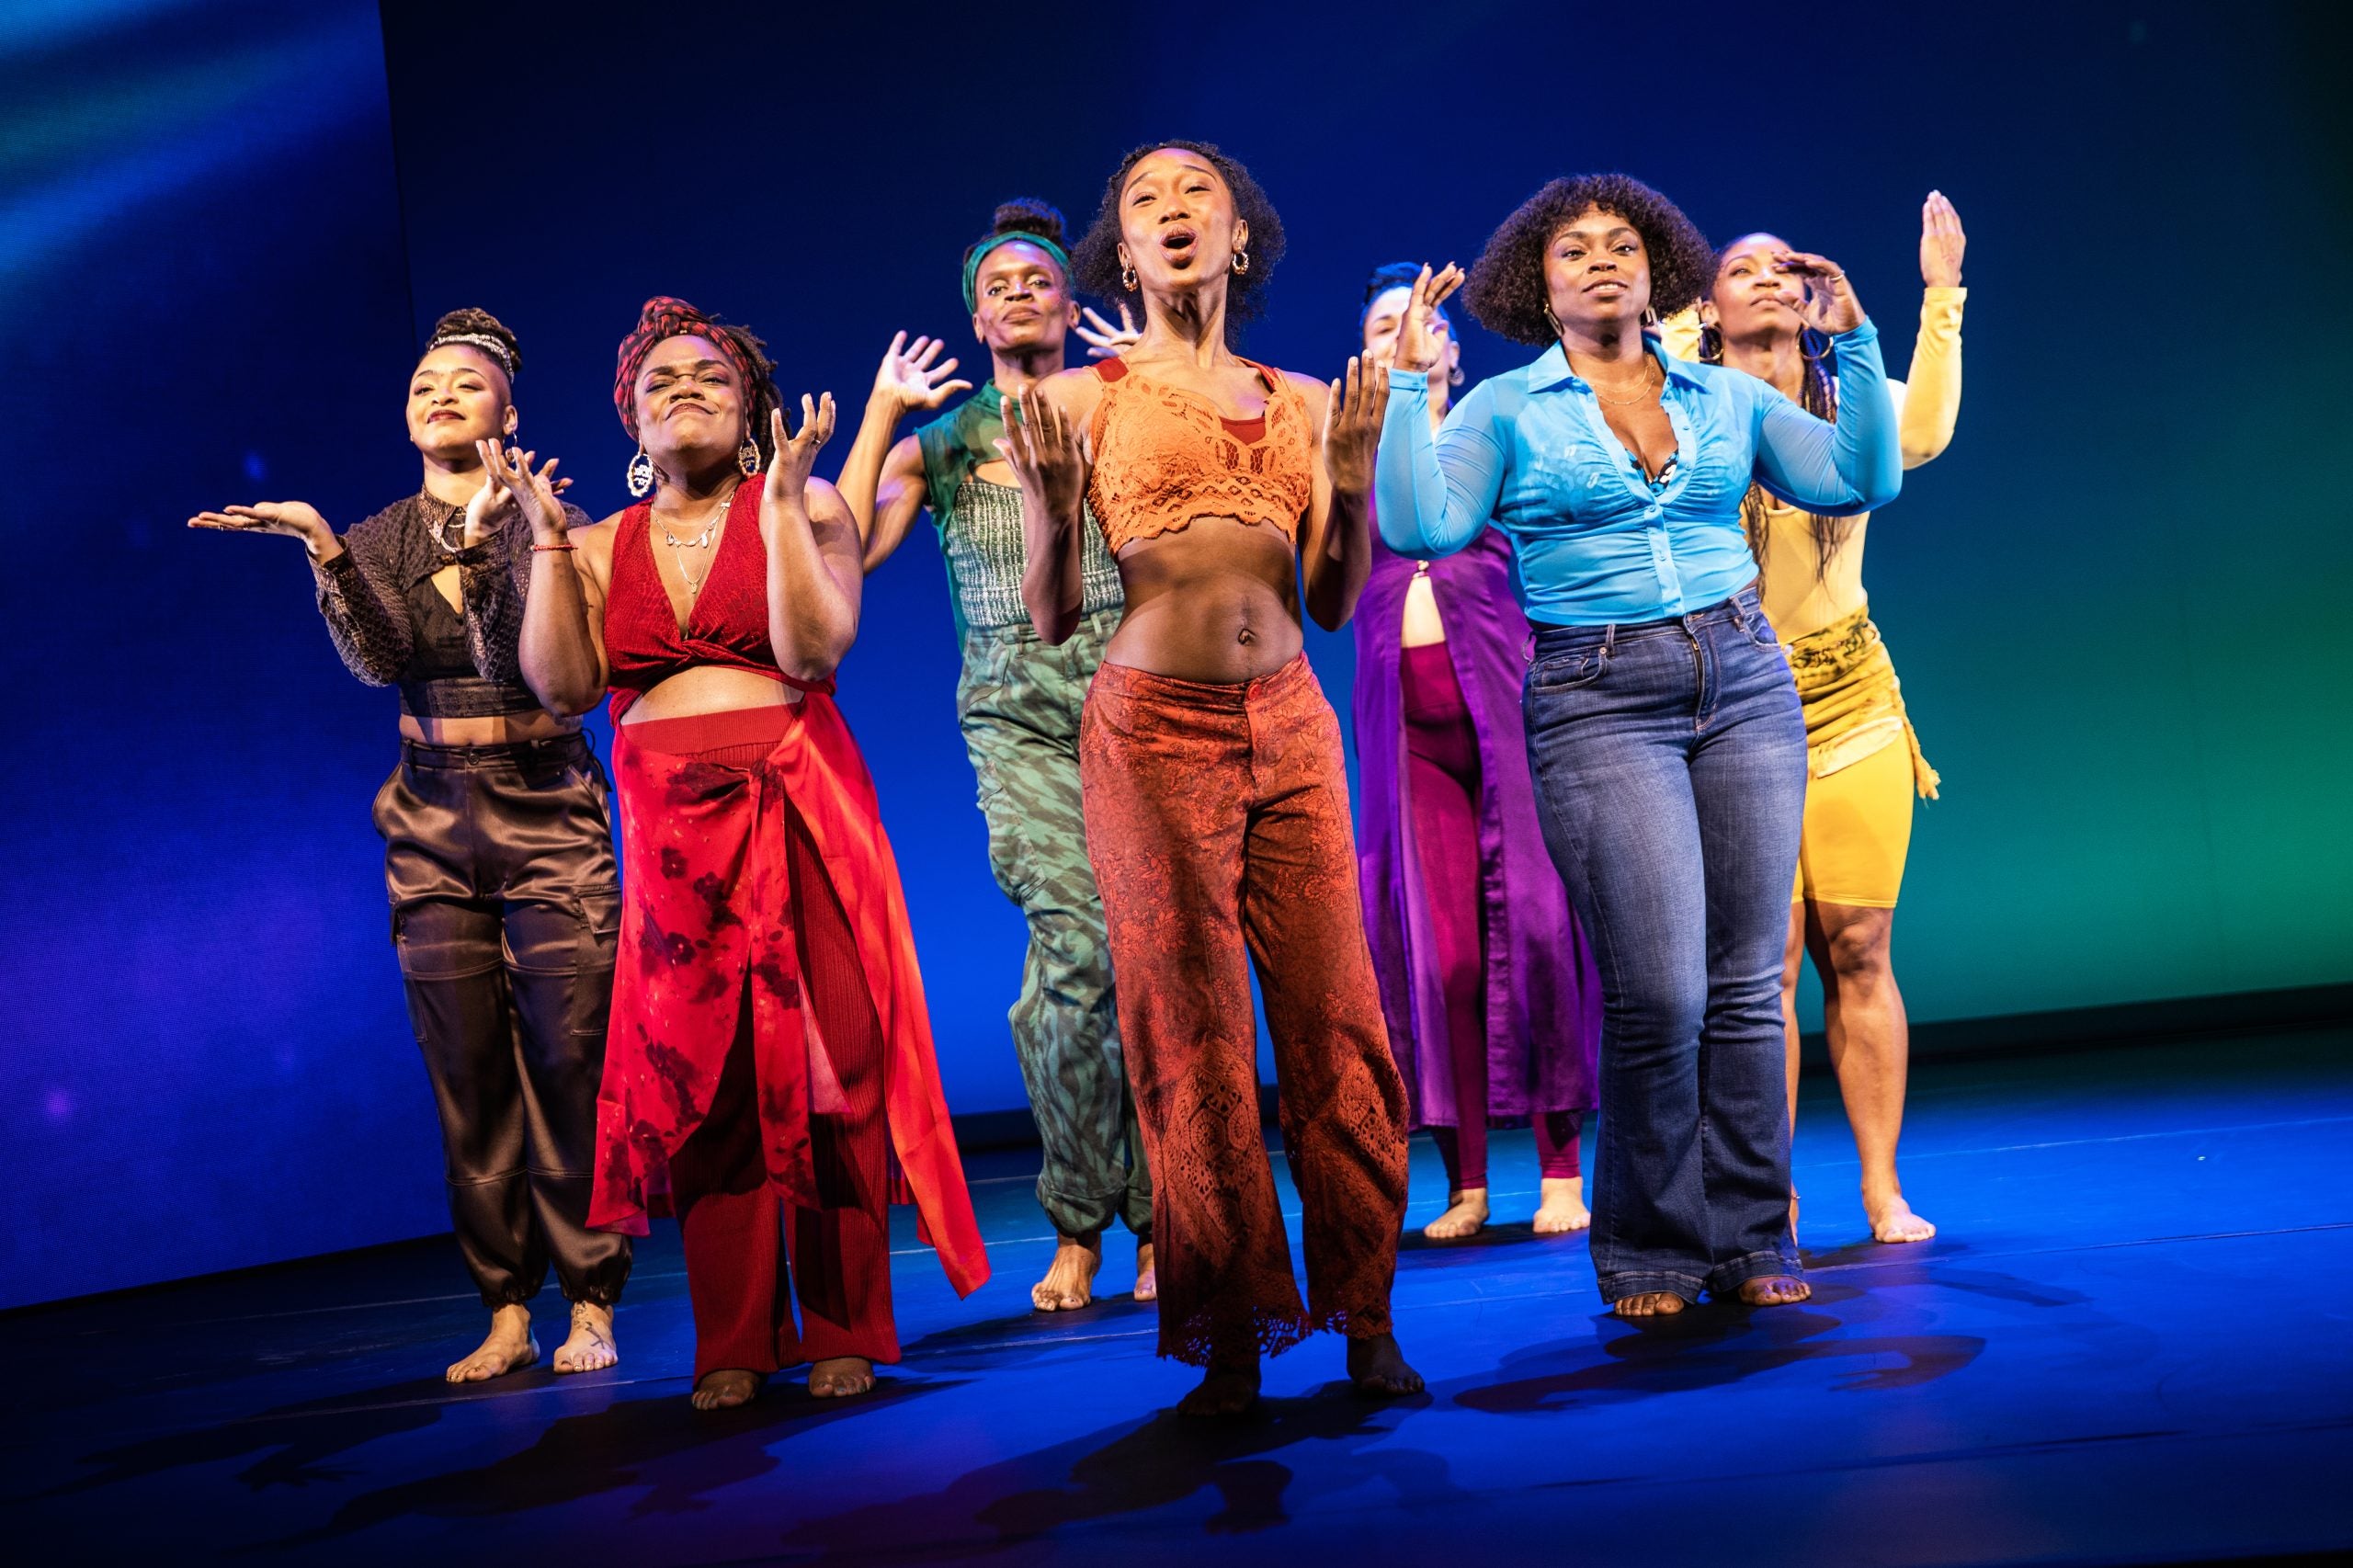 ‘This Show Is For Us:’ Director Camille A. Brown Celebrates The Rhythm Of Black Women In for colored girls